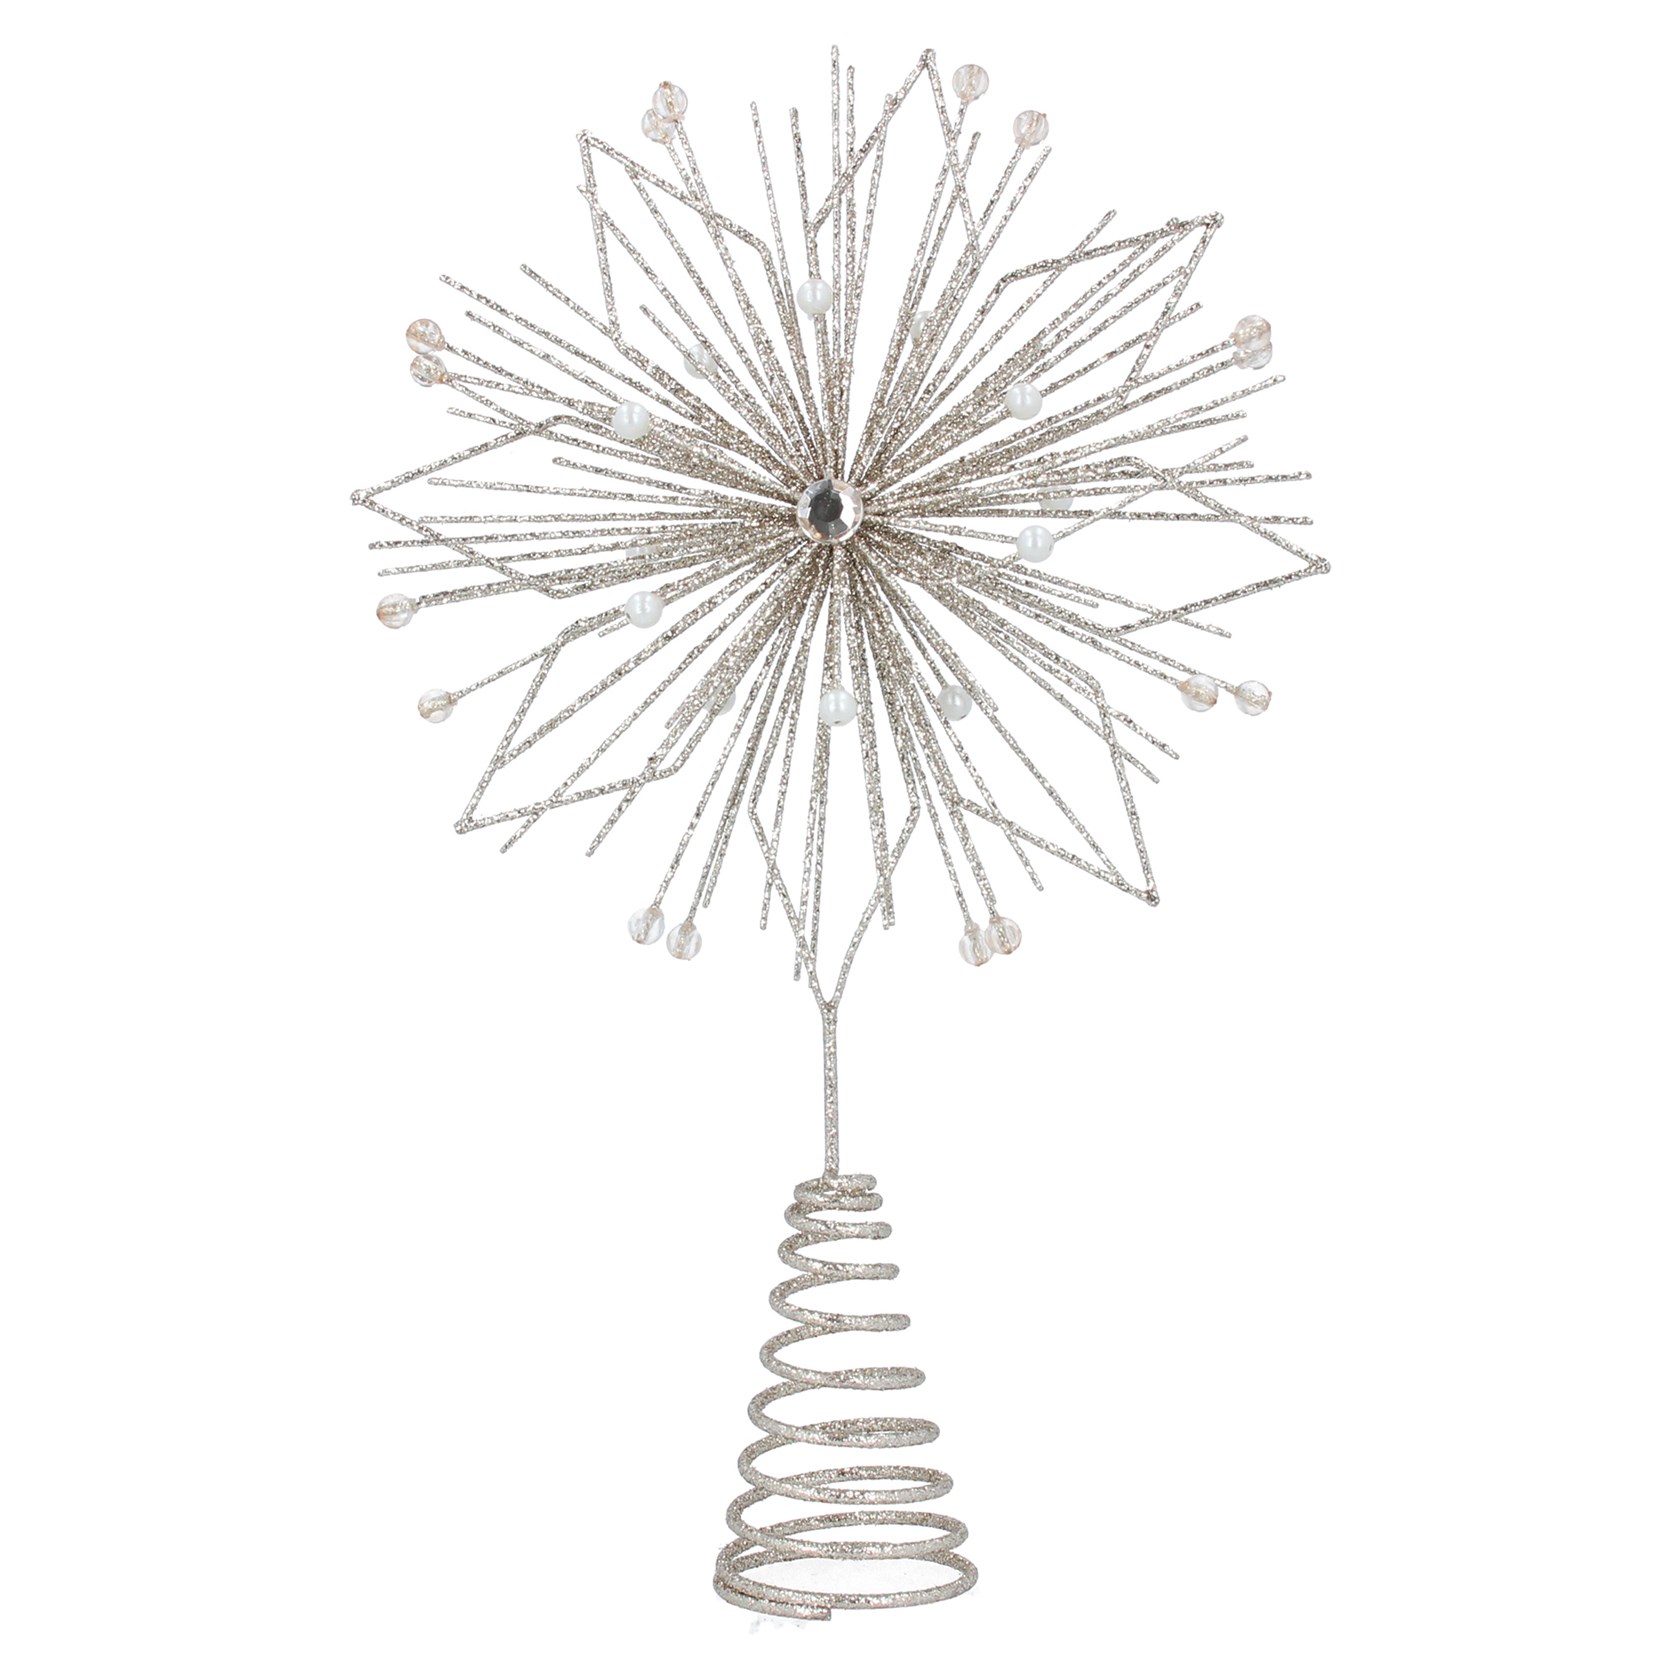 Pale gold glitter star Christmas tree topper. By Gisela Graham. The perfect festive addition to your home.